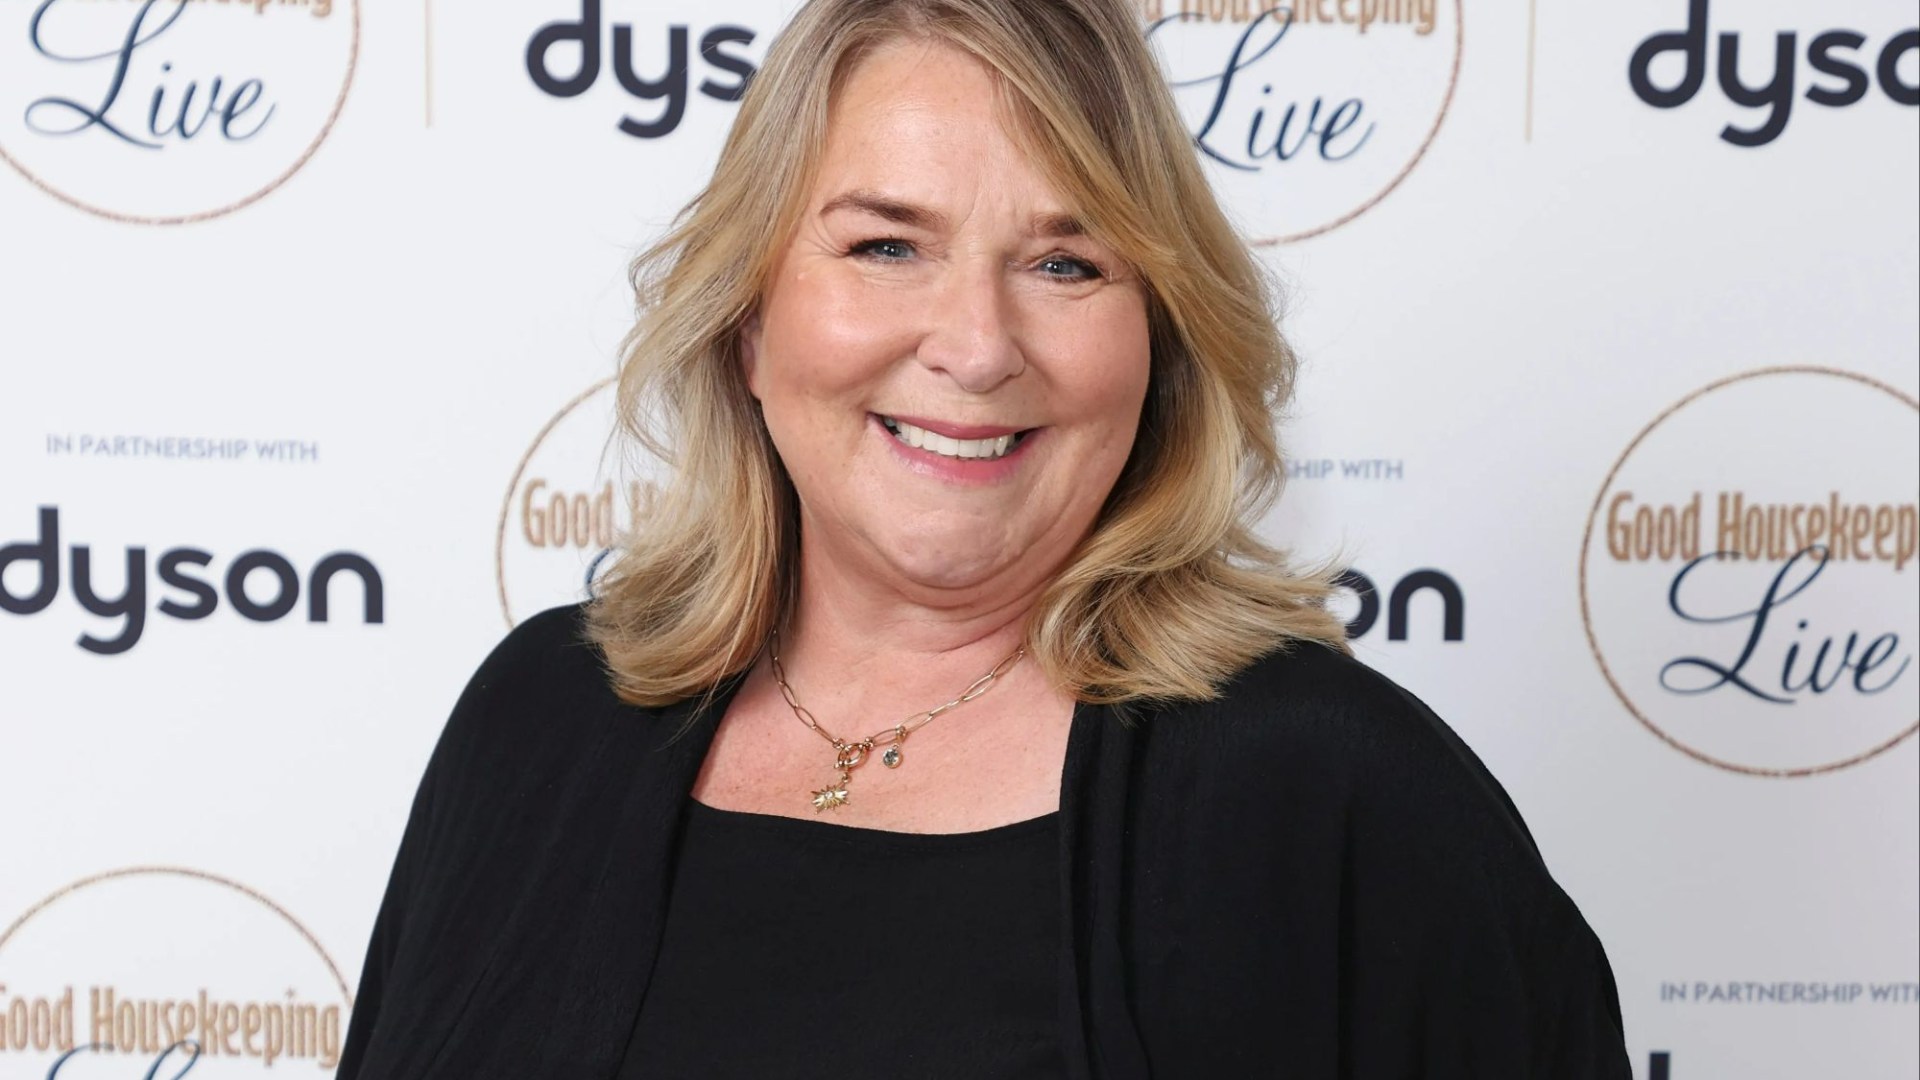 Fern Britton’s Shocking Scandals: Feuding with Phillip Schofield and Gastric Band Controversy Revealed!